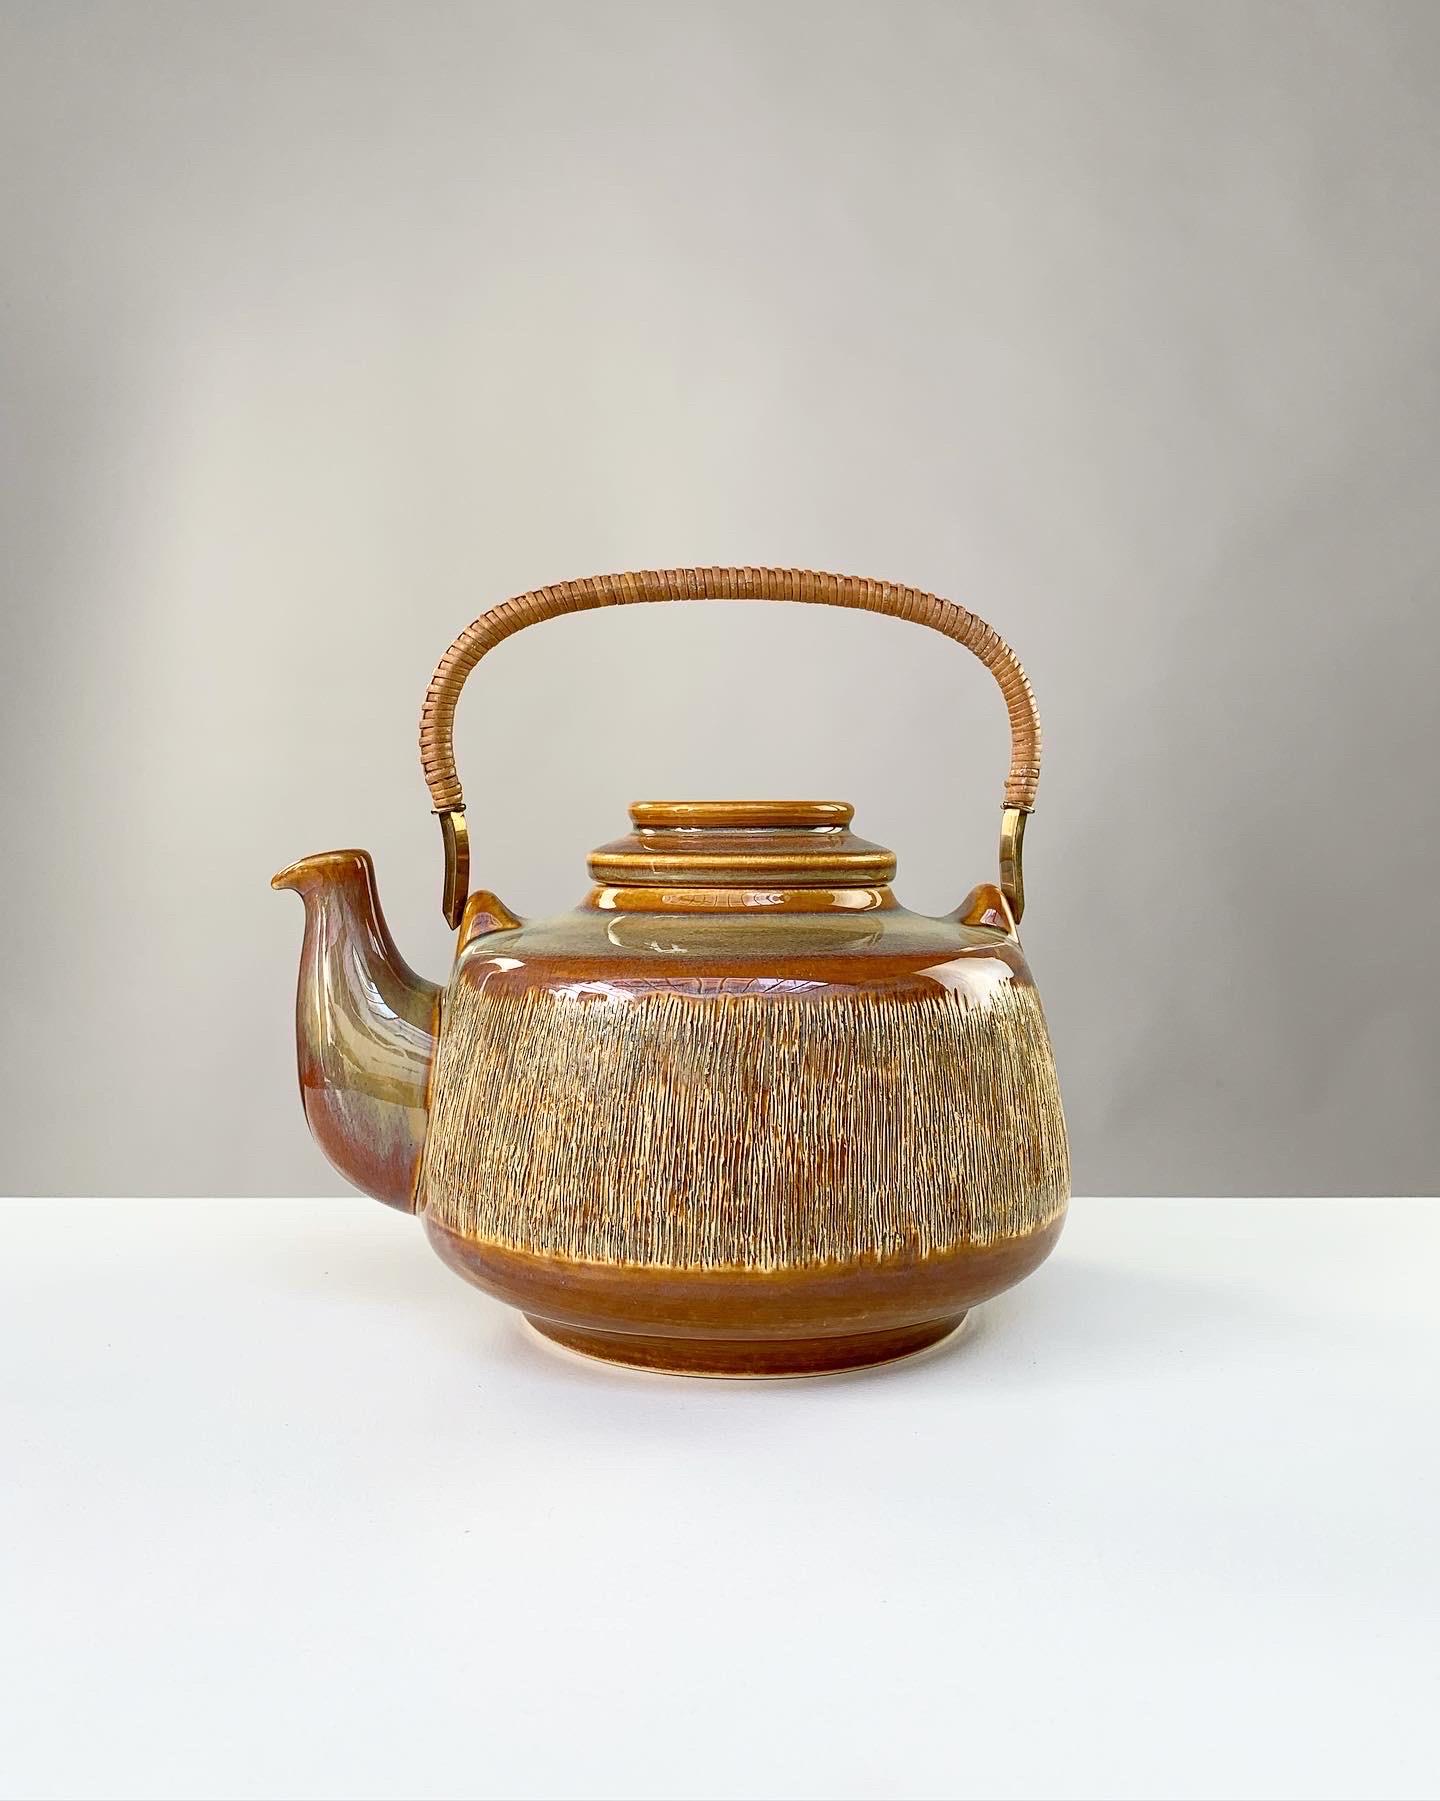 Beautiful teapot by Svend Aage Jensen from the ‚Manilla‘ series - a range of pottery pieces in sgraffitto technique with a glaze shining like mother of pearl.

Manufactured by Søholm in Denmark in the 1960s.

Solid brass handle with wicker